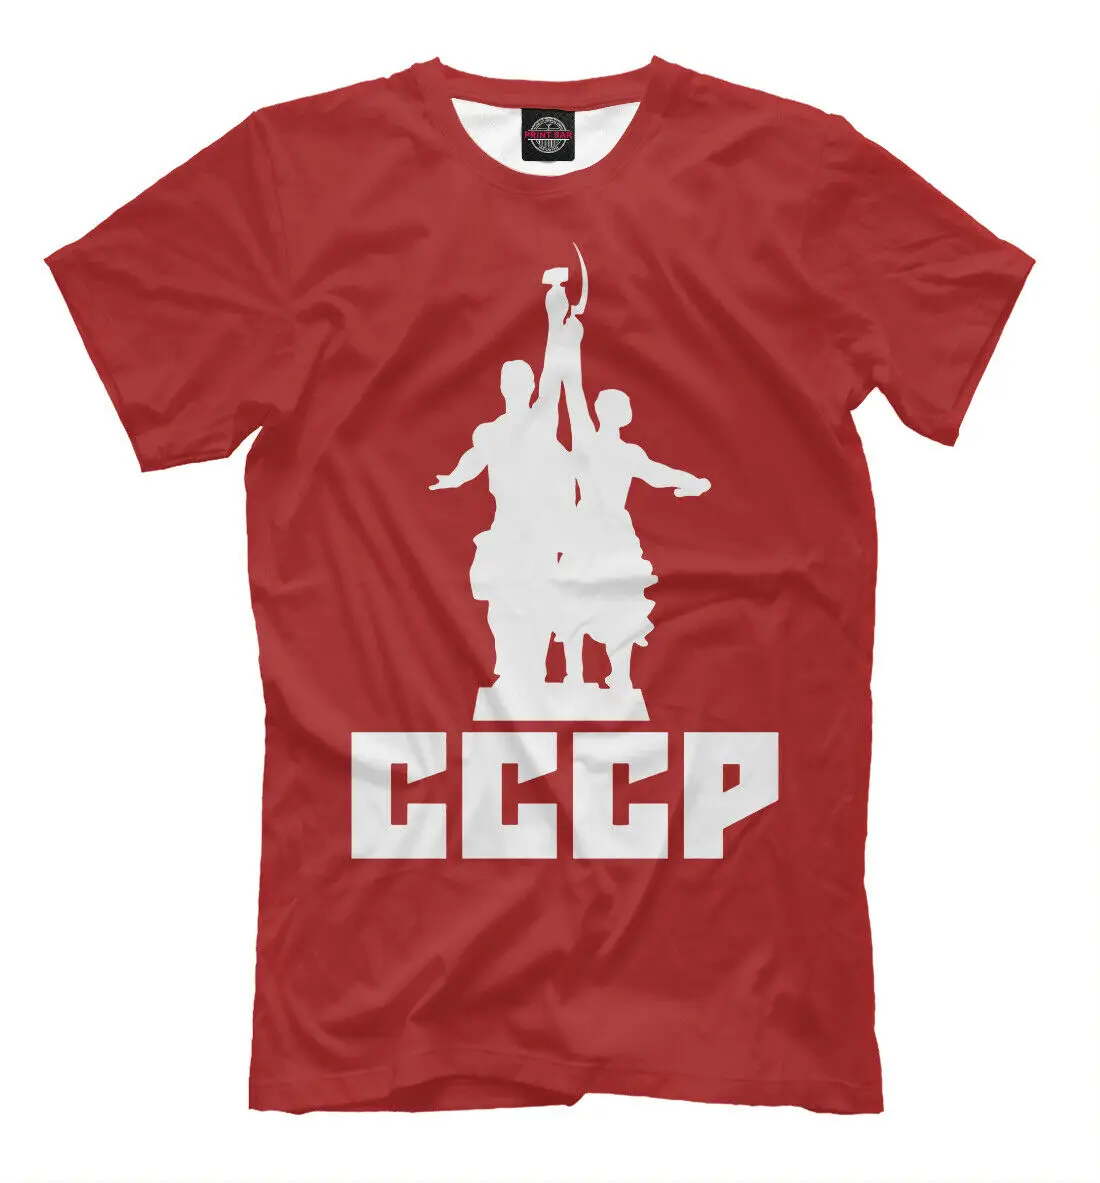 

СССР Men New T-shirt USSR Russia Soviet Union Worker and Collective Farmer Shirts Red Size S-3XL